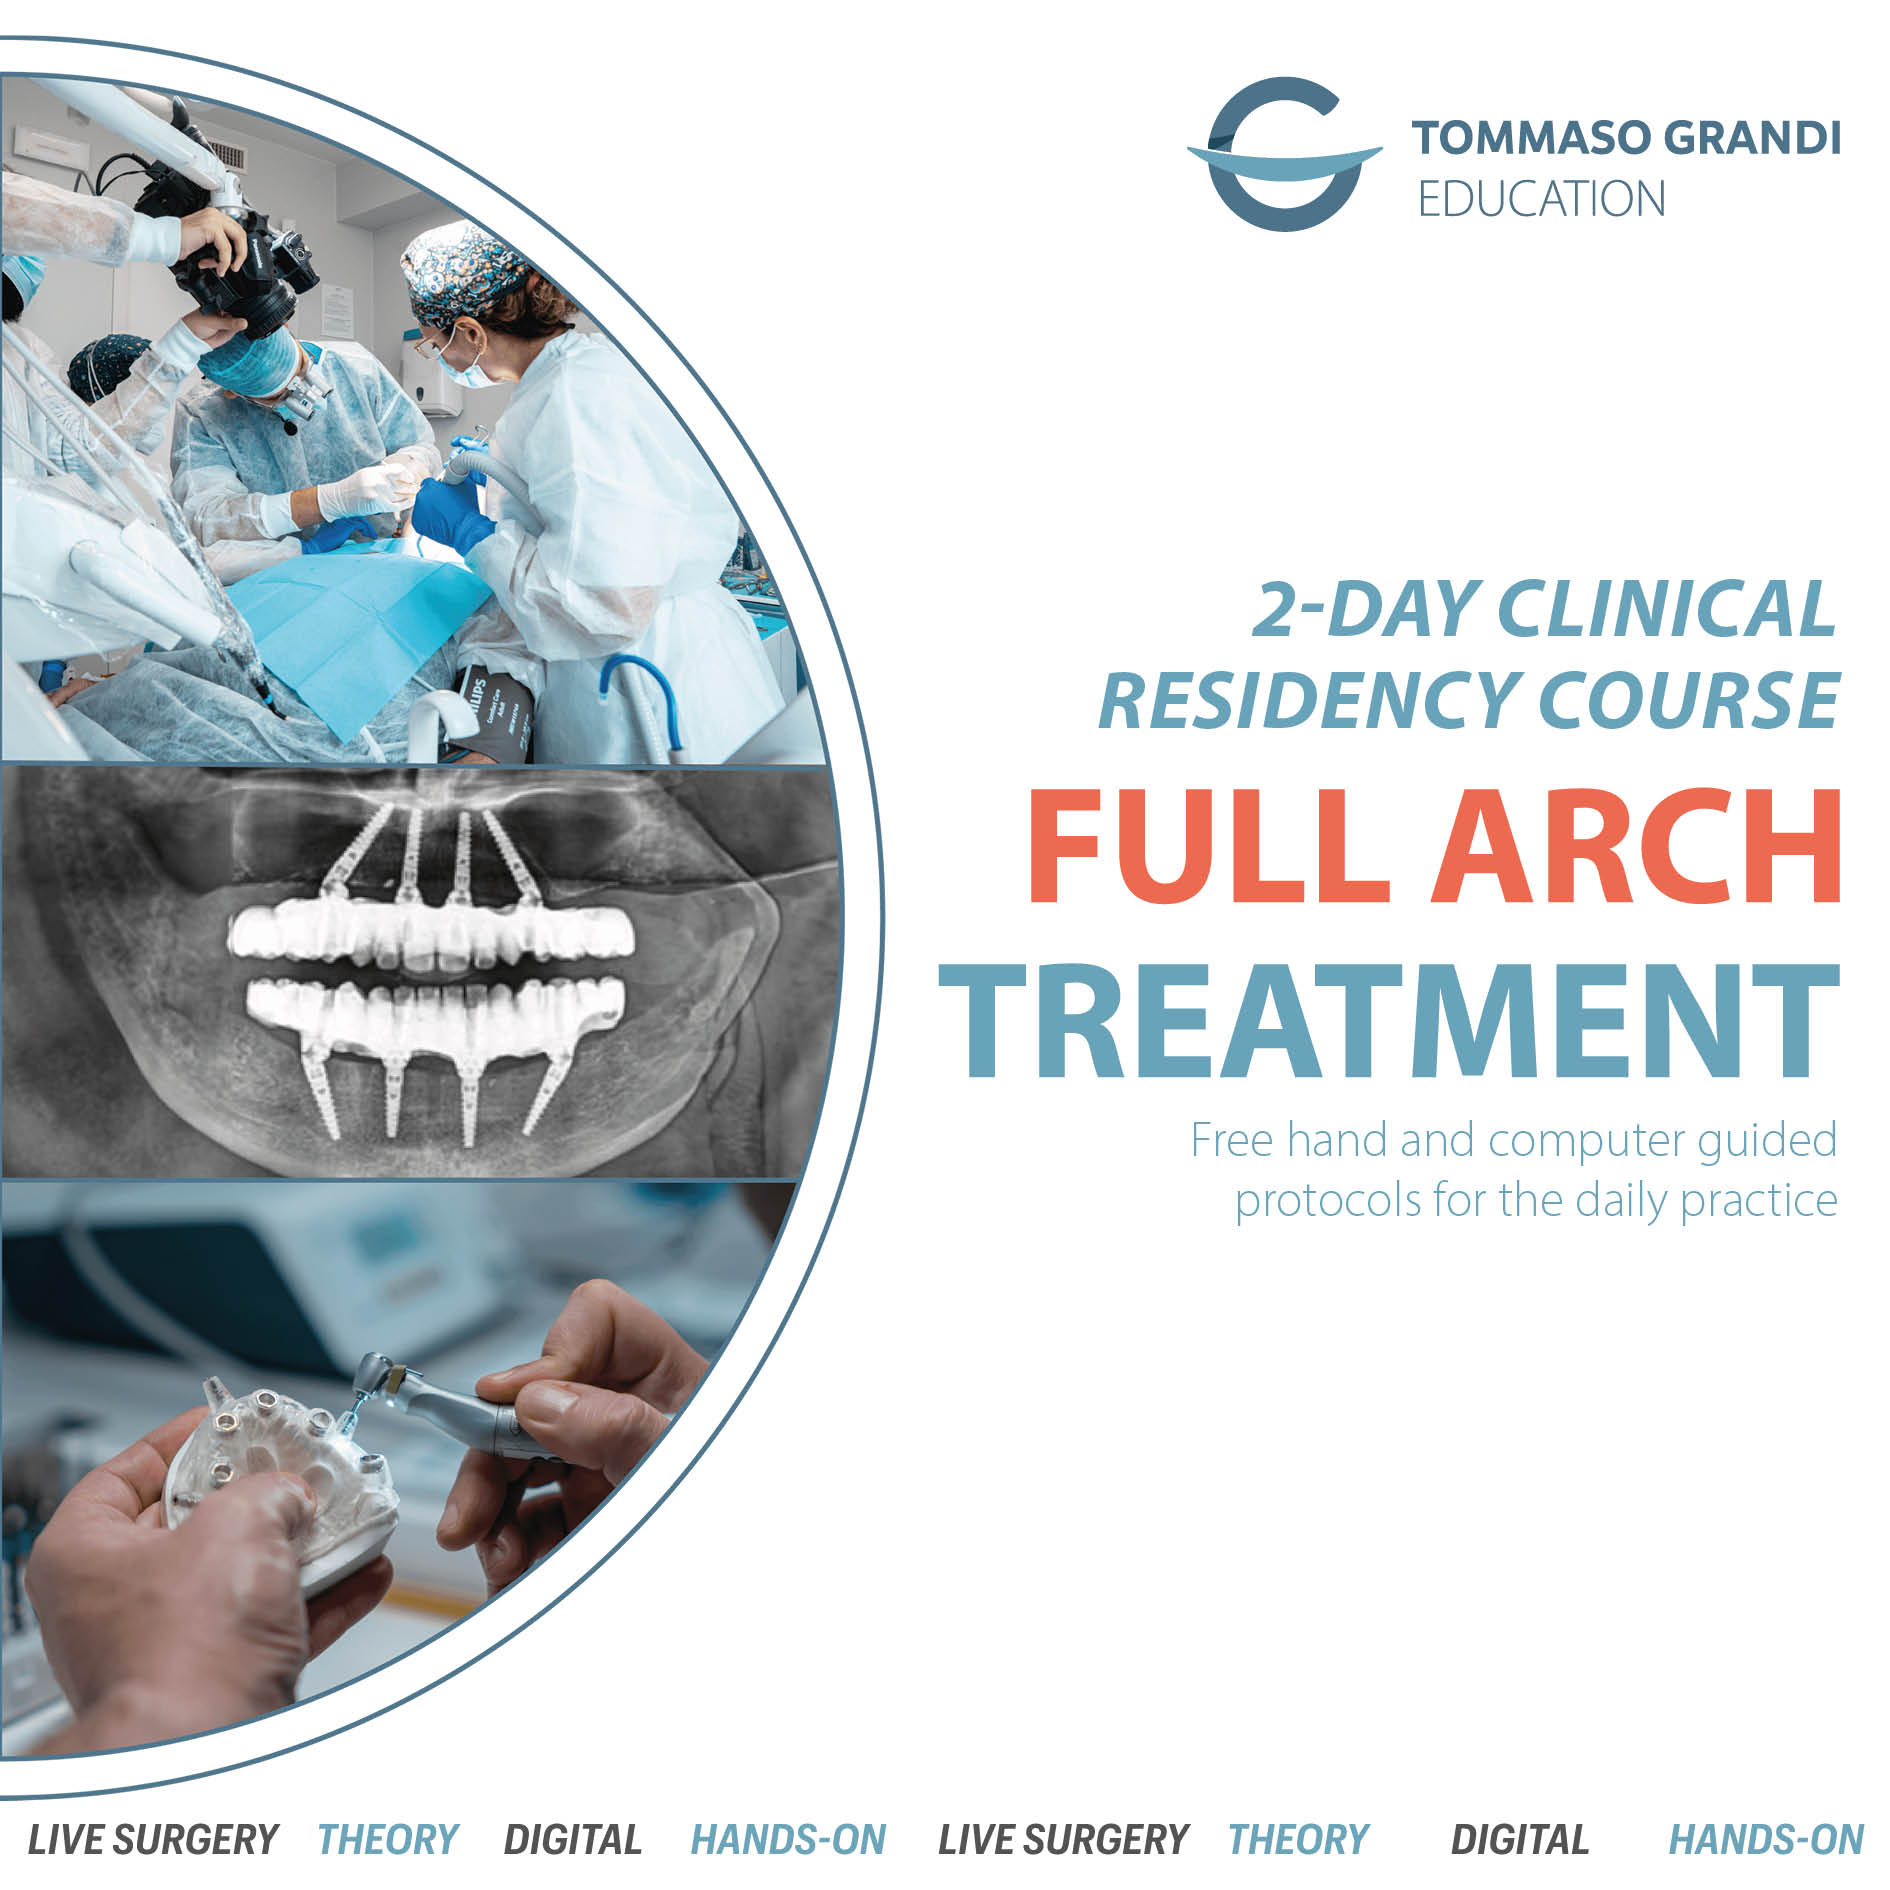 2-day clinical residency course “Full Arch Treatment”